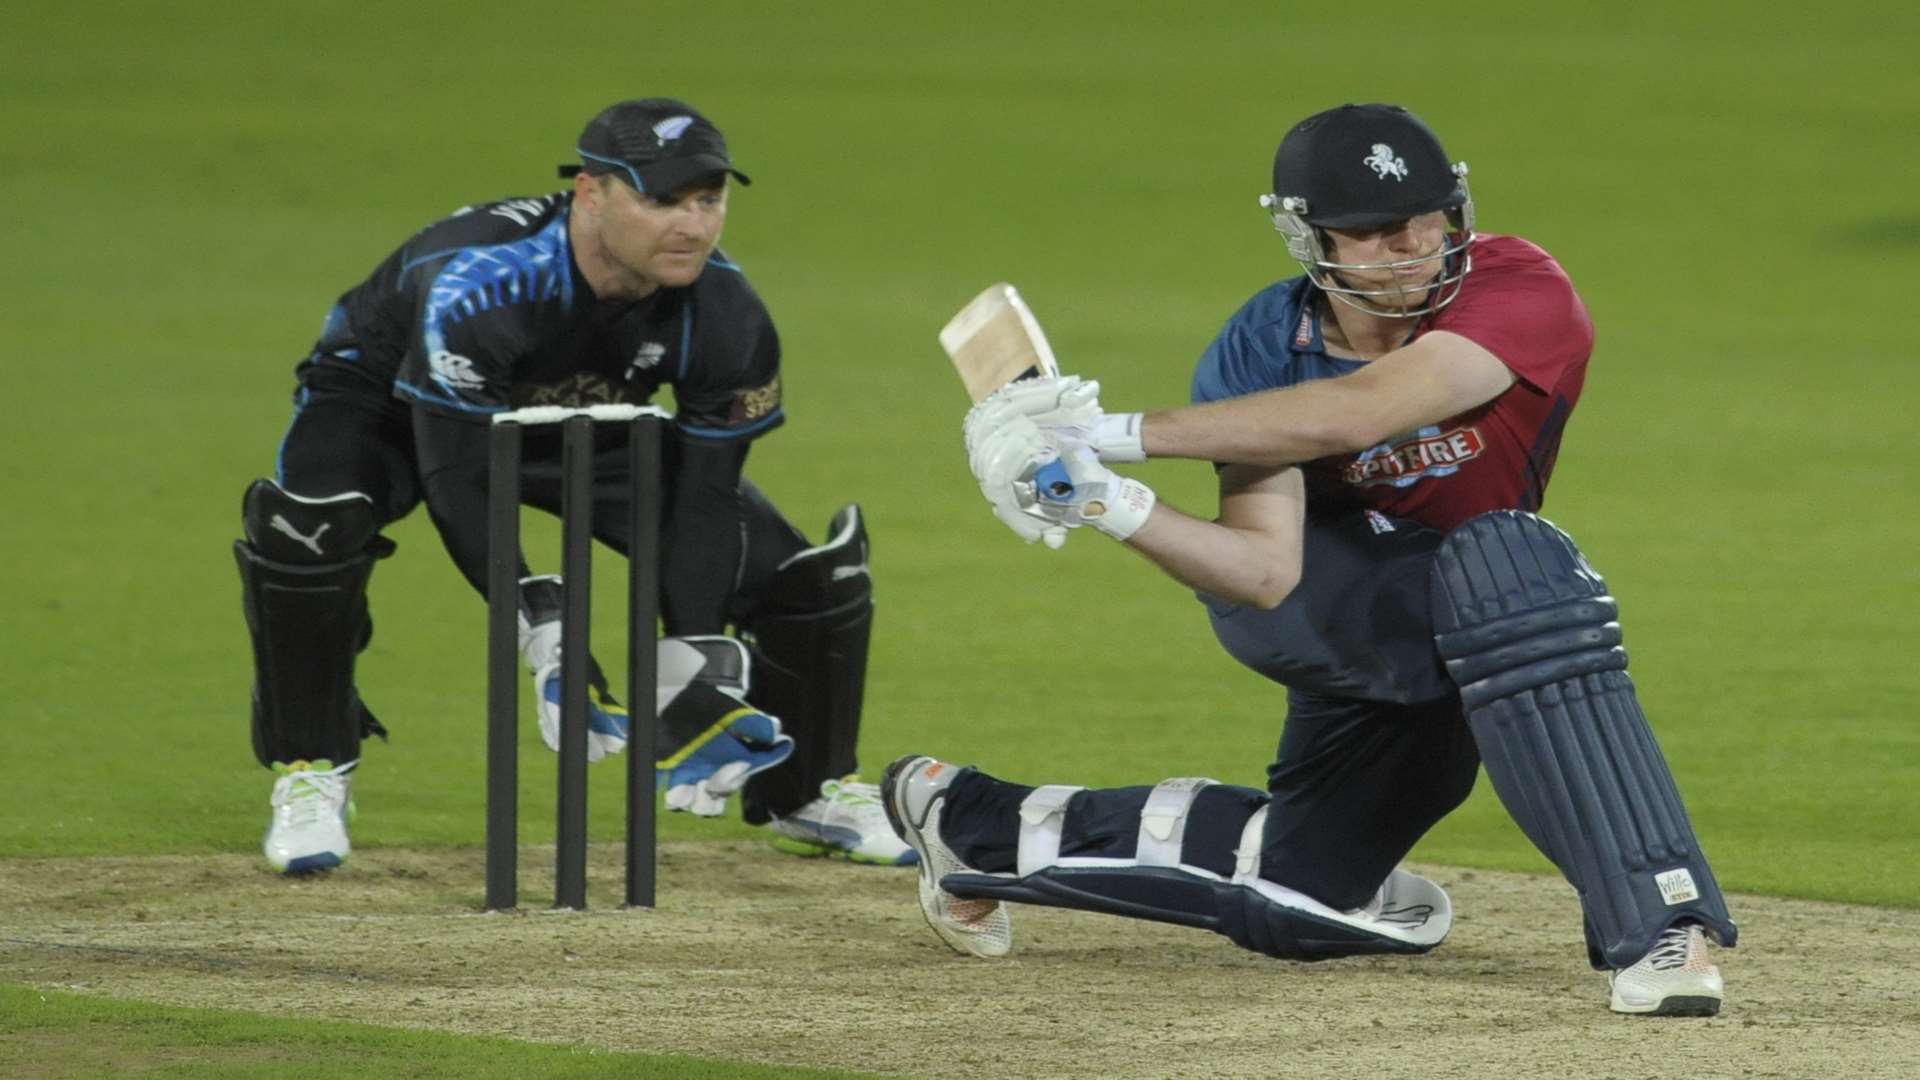 Brendan McCullum in action for New Zealand at Canterbury in 2013